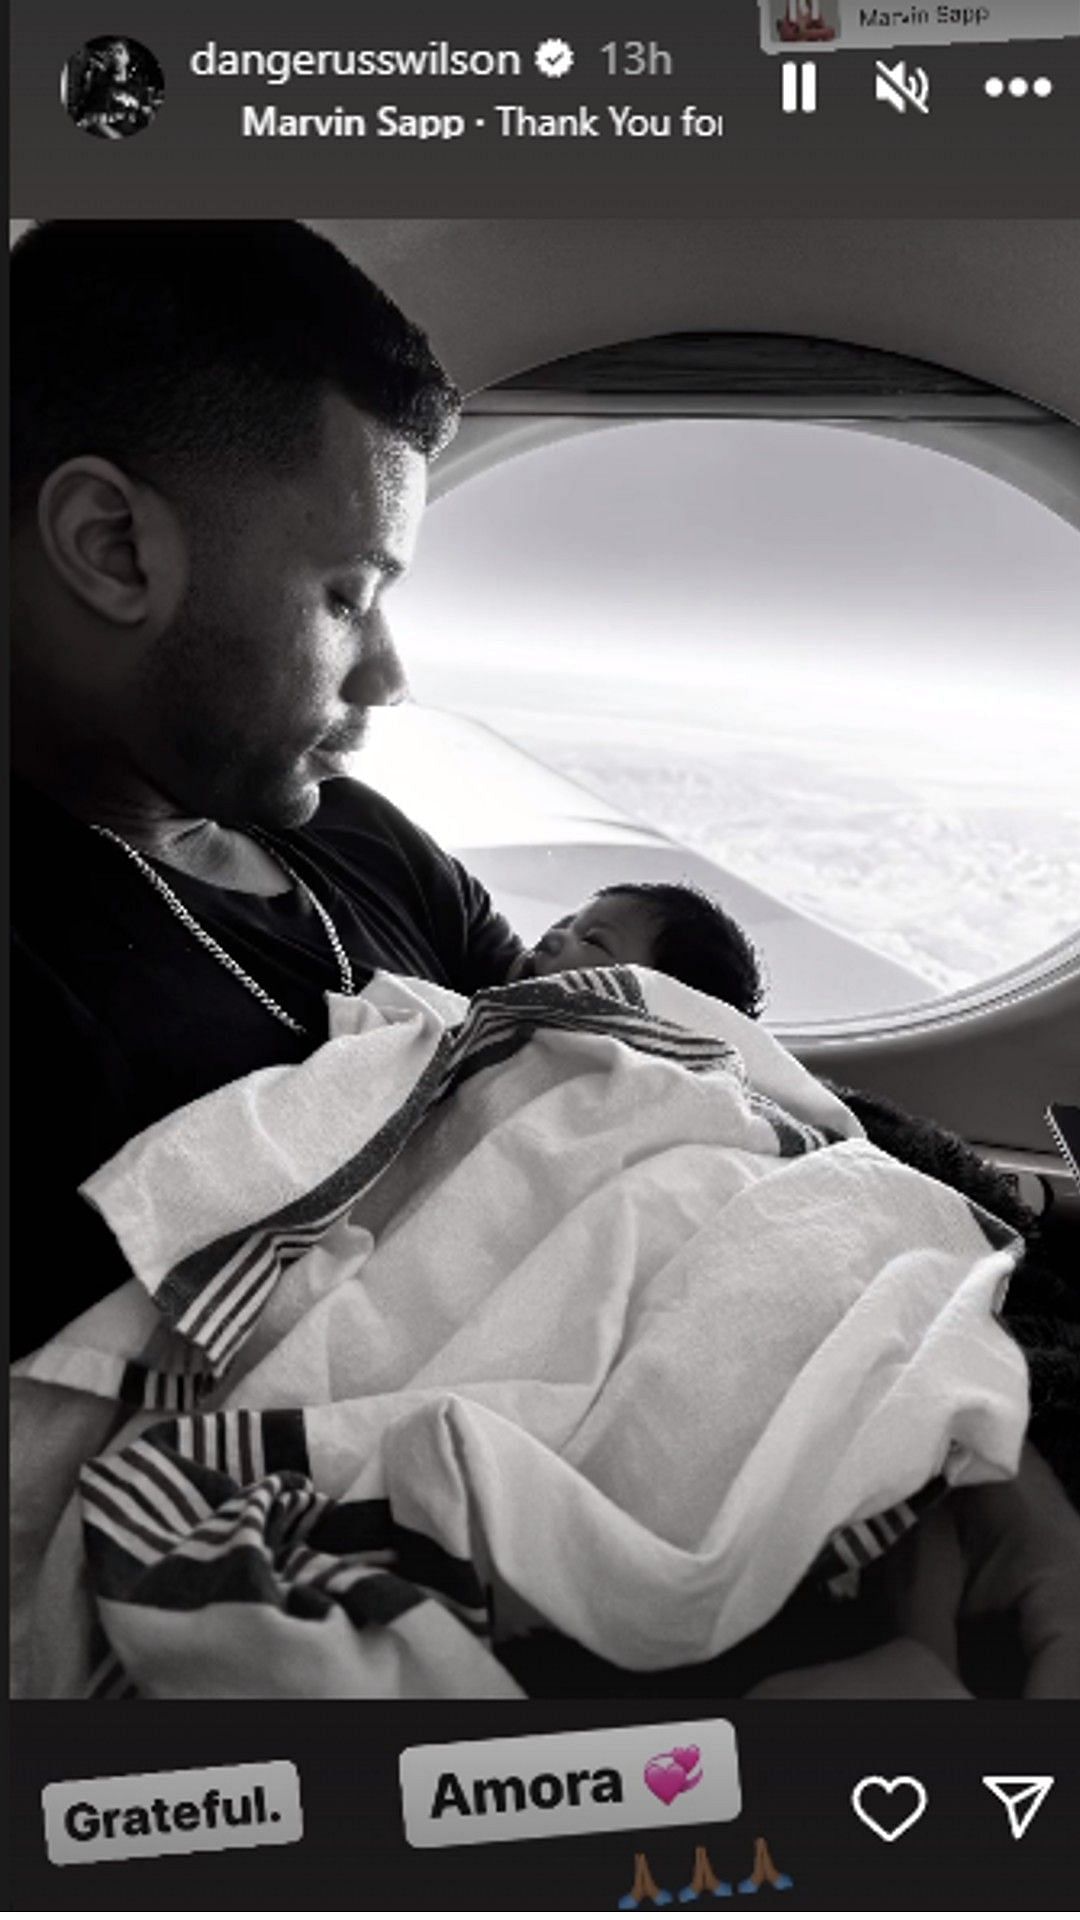 Russell Wilson posted a photo on Instagram of his newborn daughter&#039;s first flight.